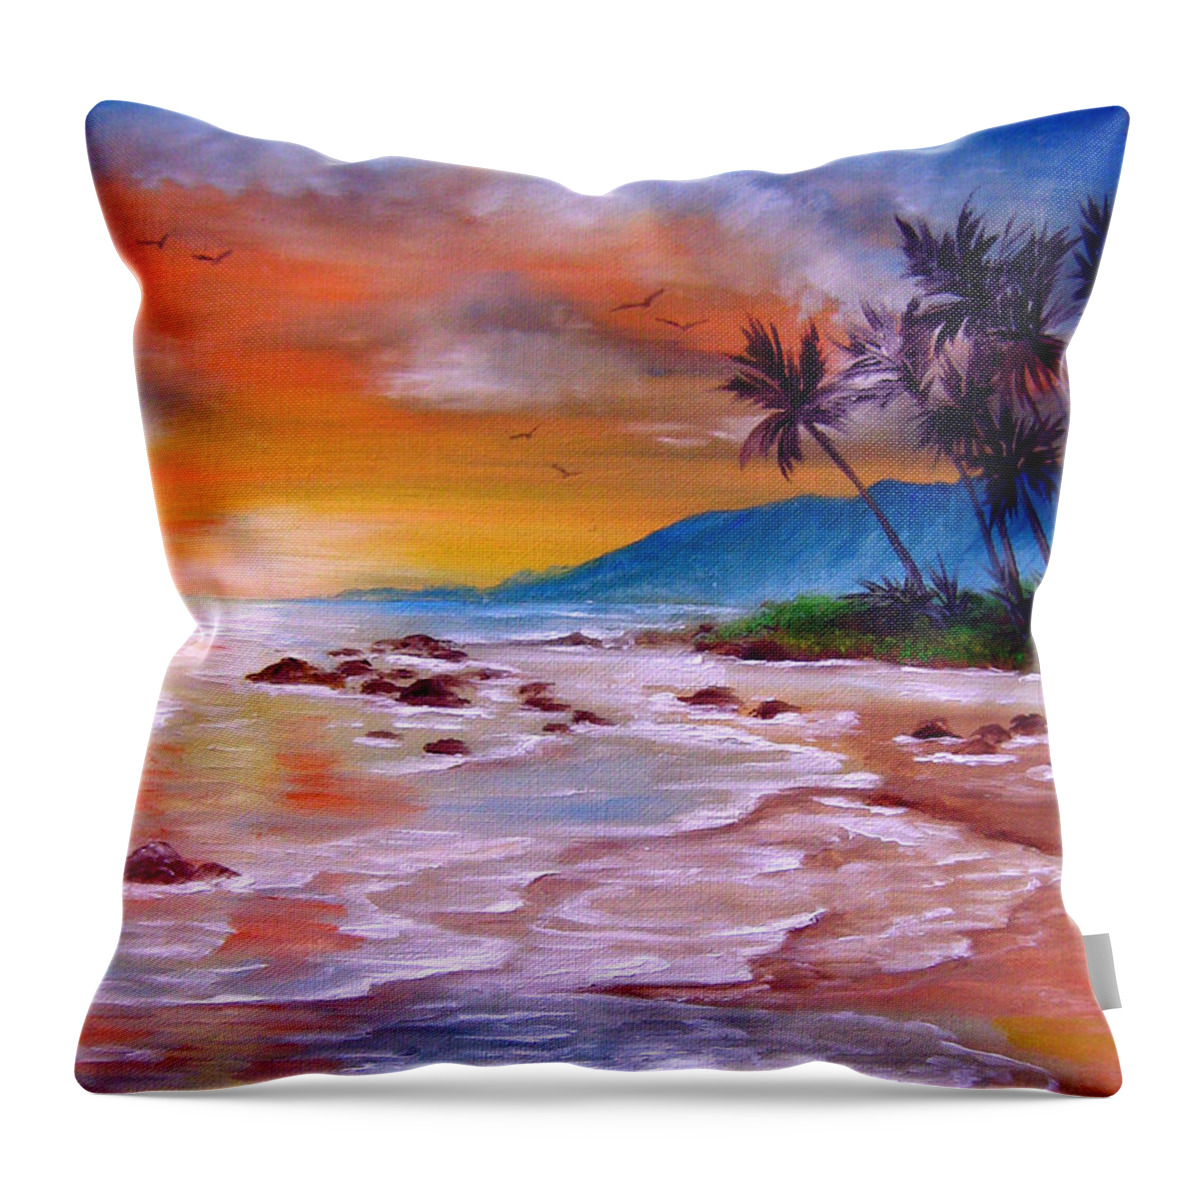 Tropical Throw Pillow featuring the painting Golden Dawn by Bella Apollonia